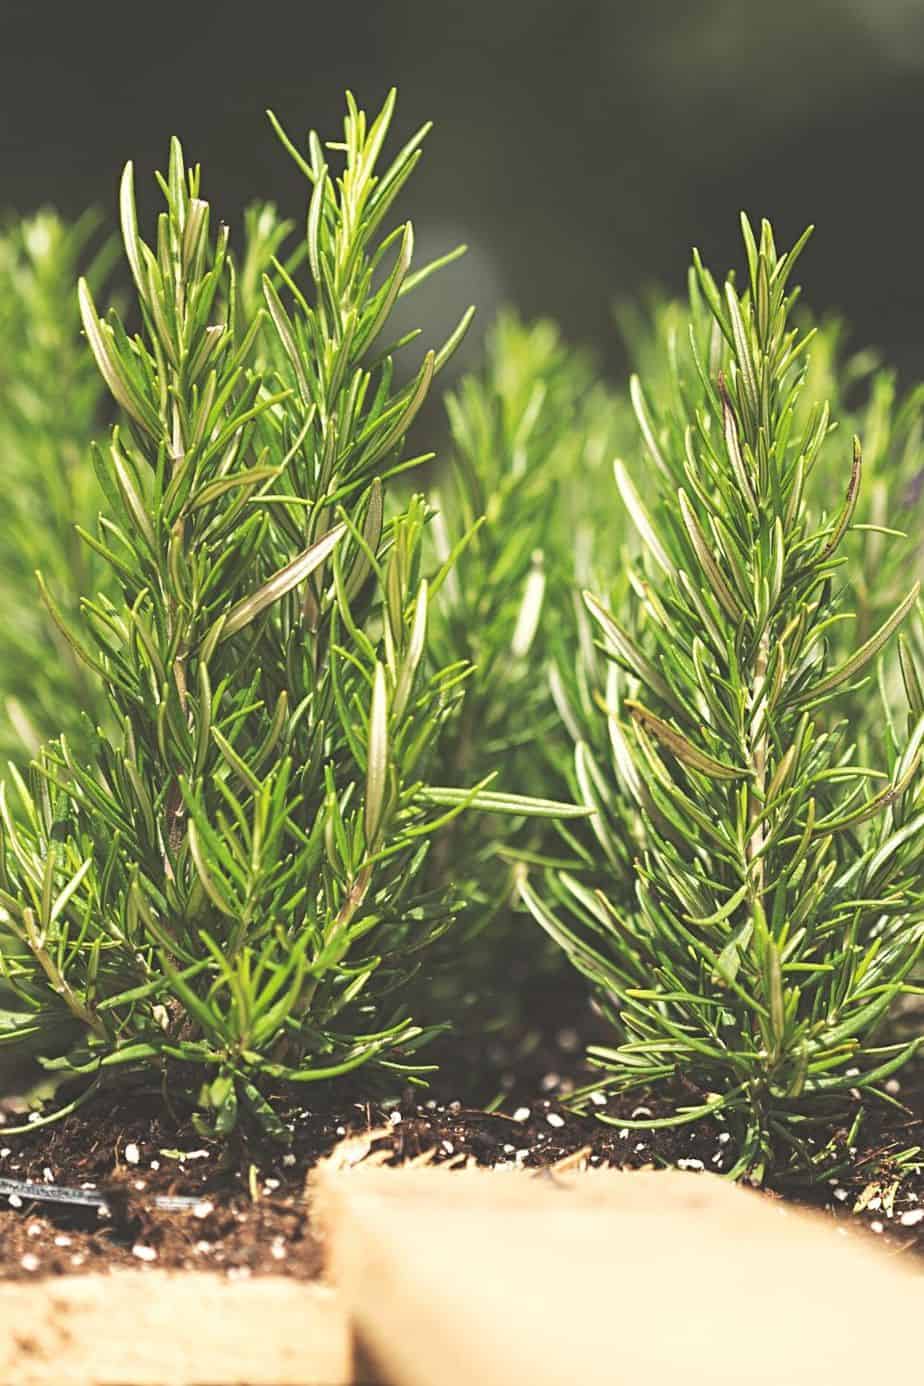 You need to cut 6-8 inches of Rosemary for you to grow this herb in water